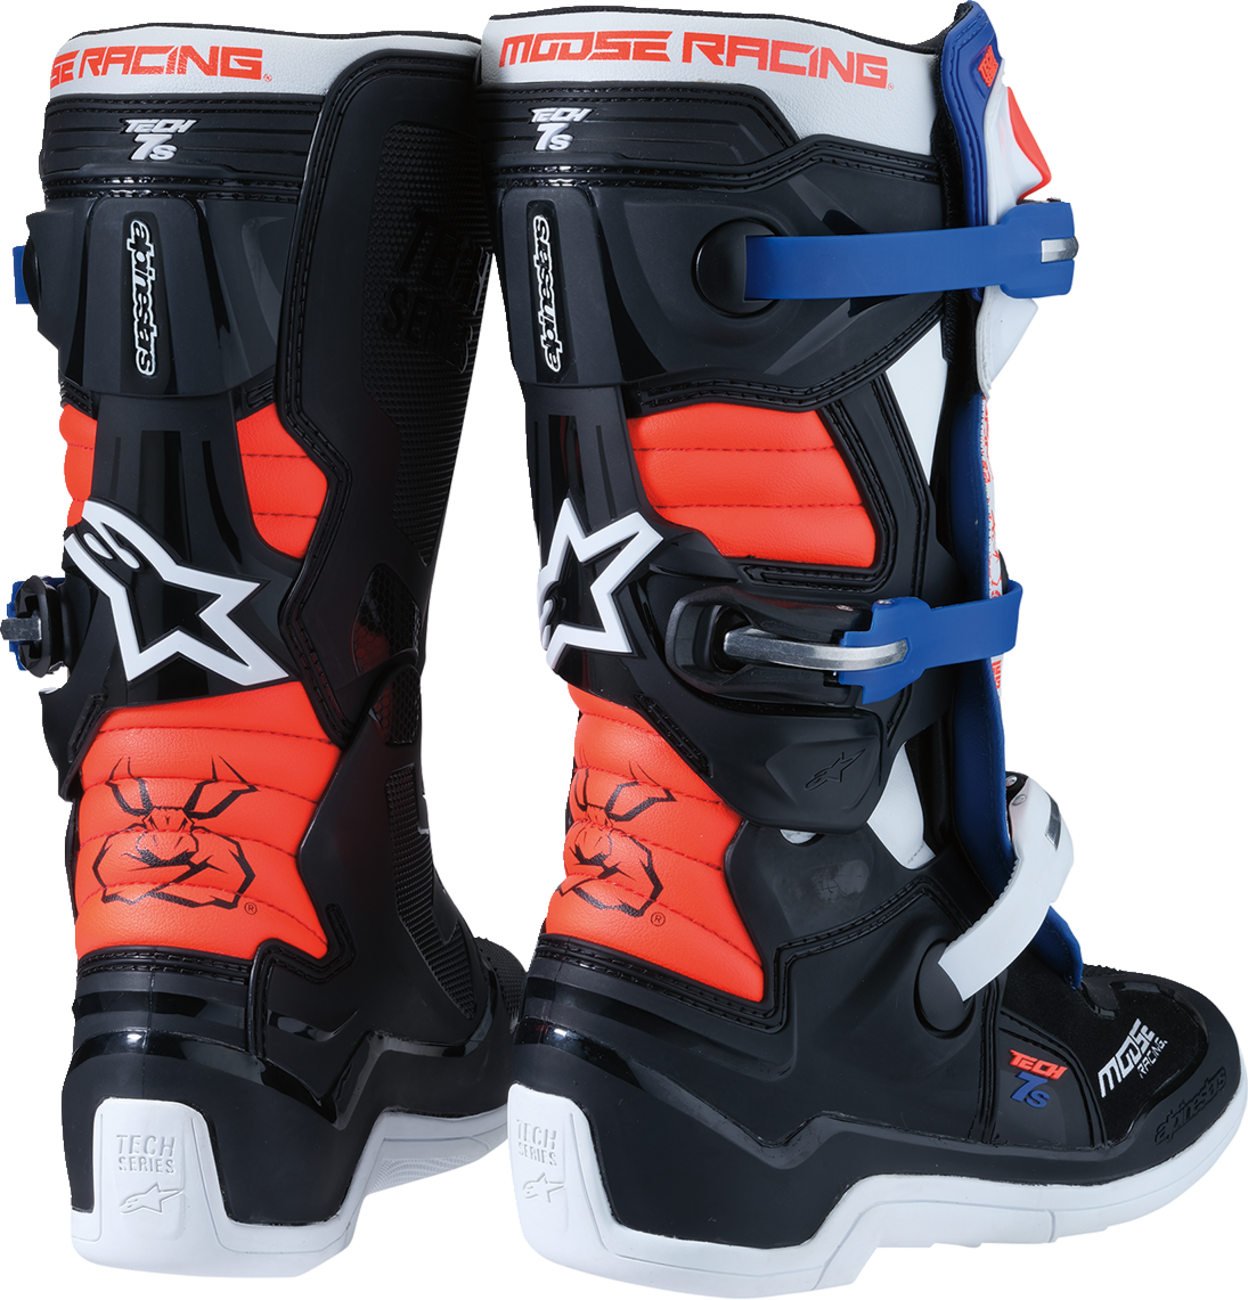 MOOSE RACING Youth Tech 7S Boots - Black/White/Red/Blue - US 6 0215024-1297-6